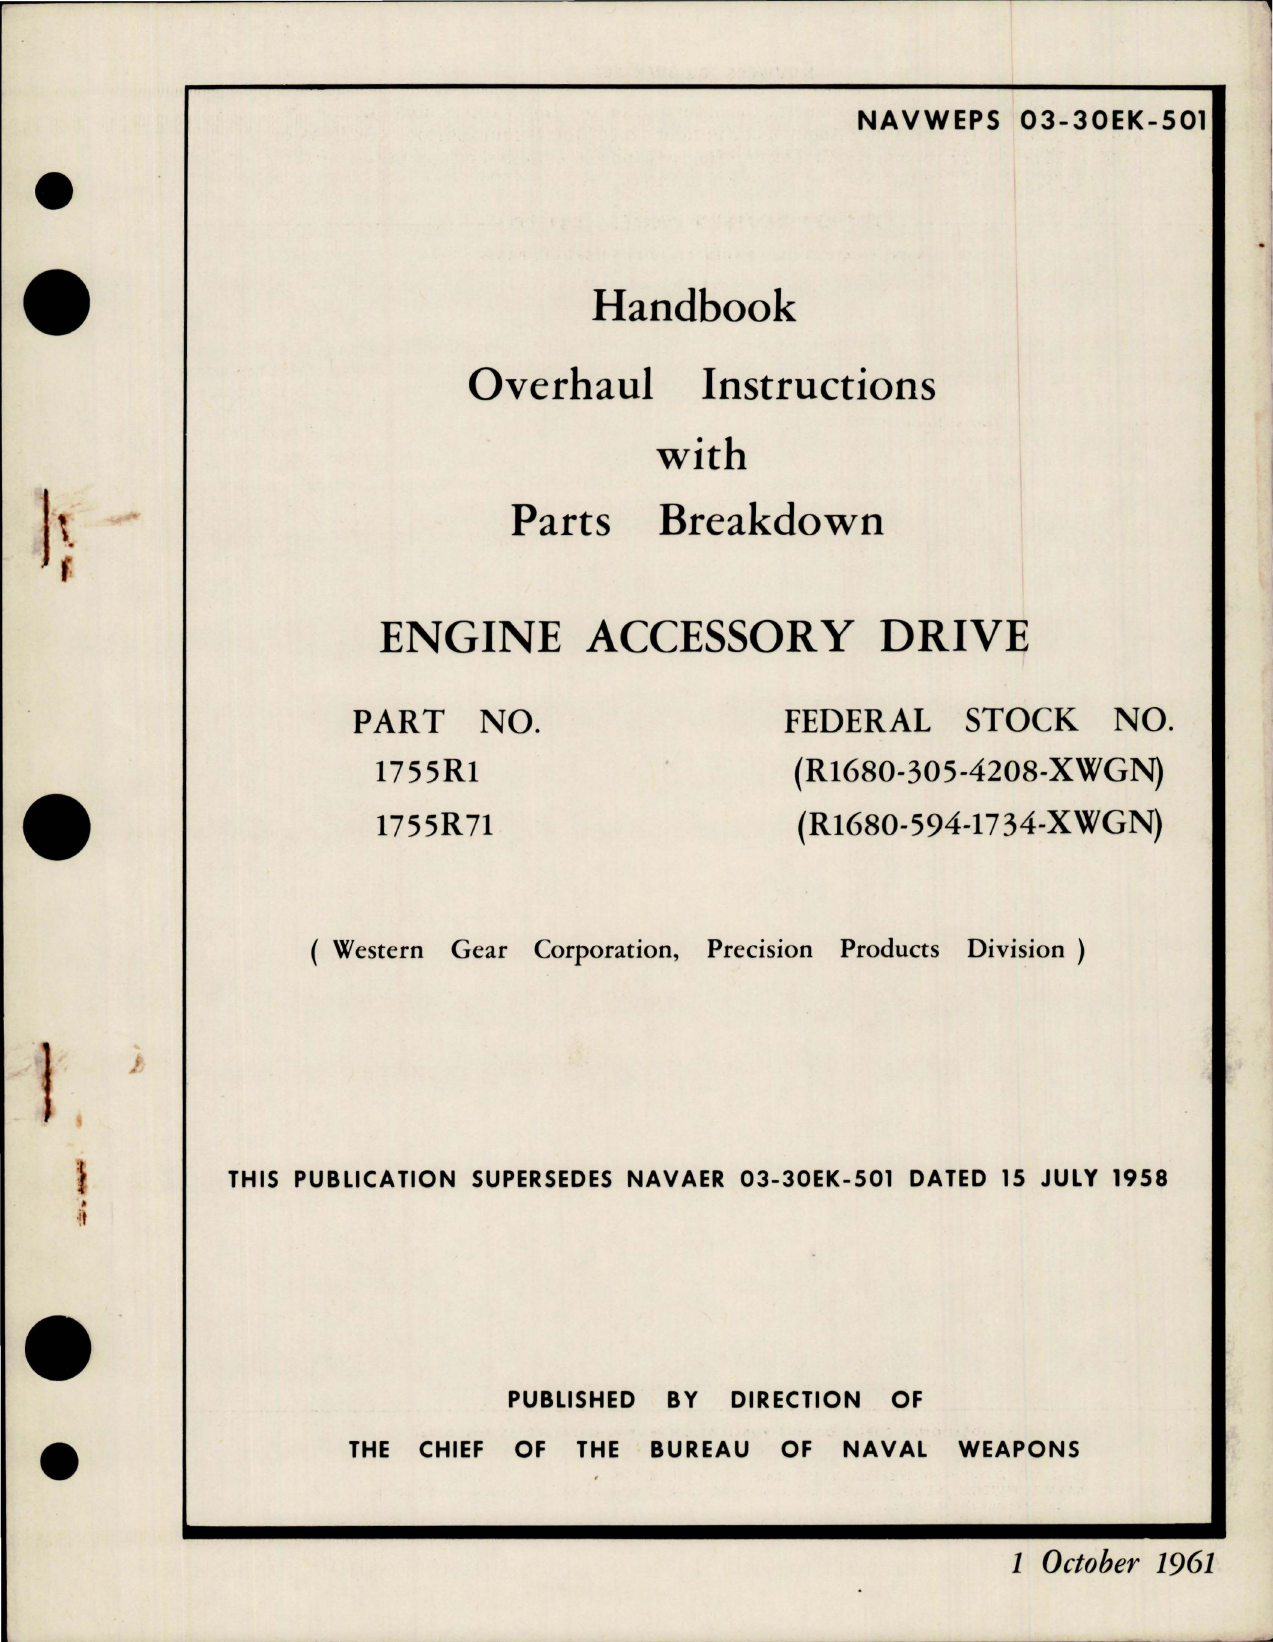 Sample page 1 from AirCorps Library document: Overhaul Instructions with Parts Breakdown for Engine Accessory Drive - Parts 1755R1 and 1755R71 